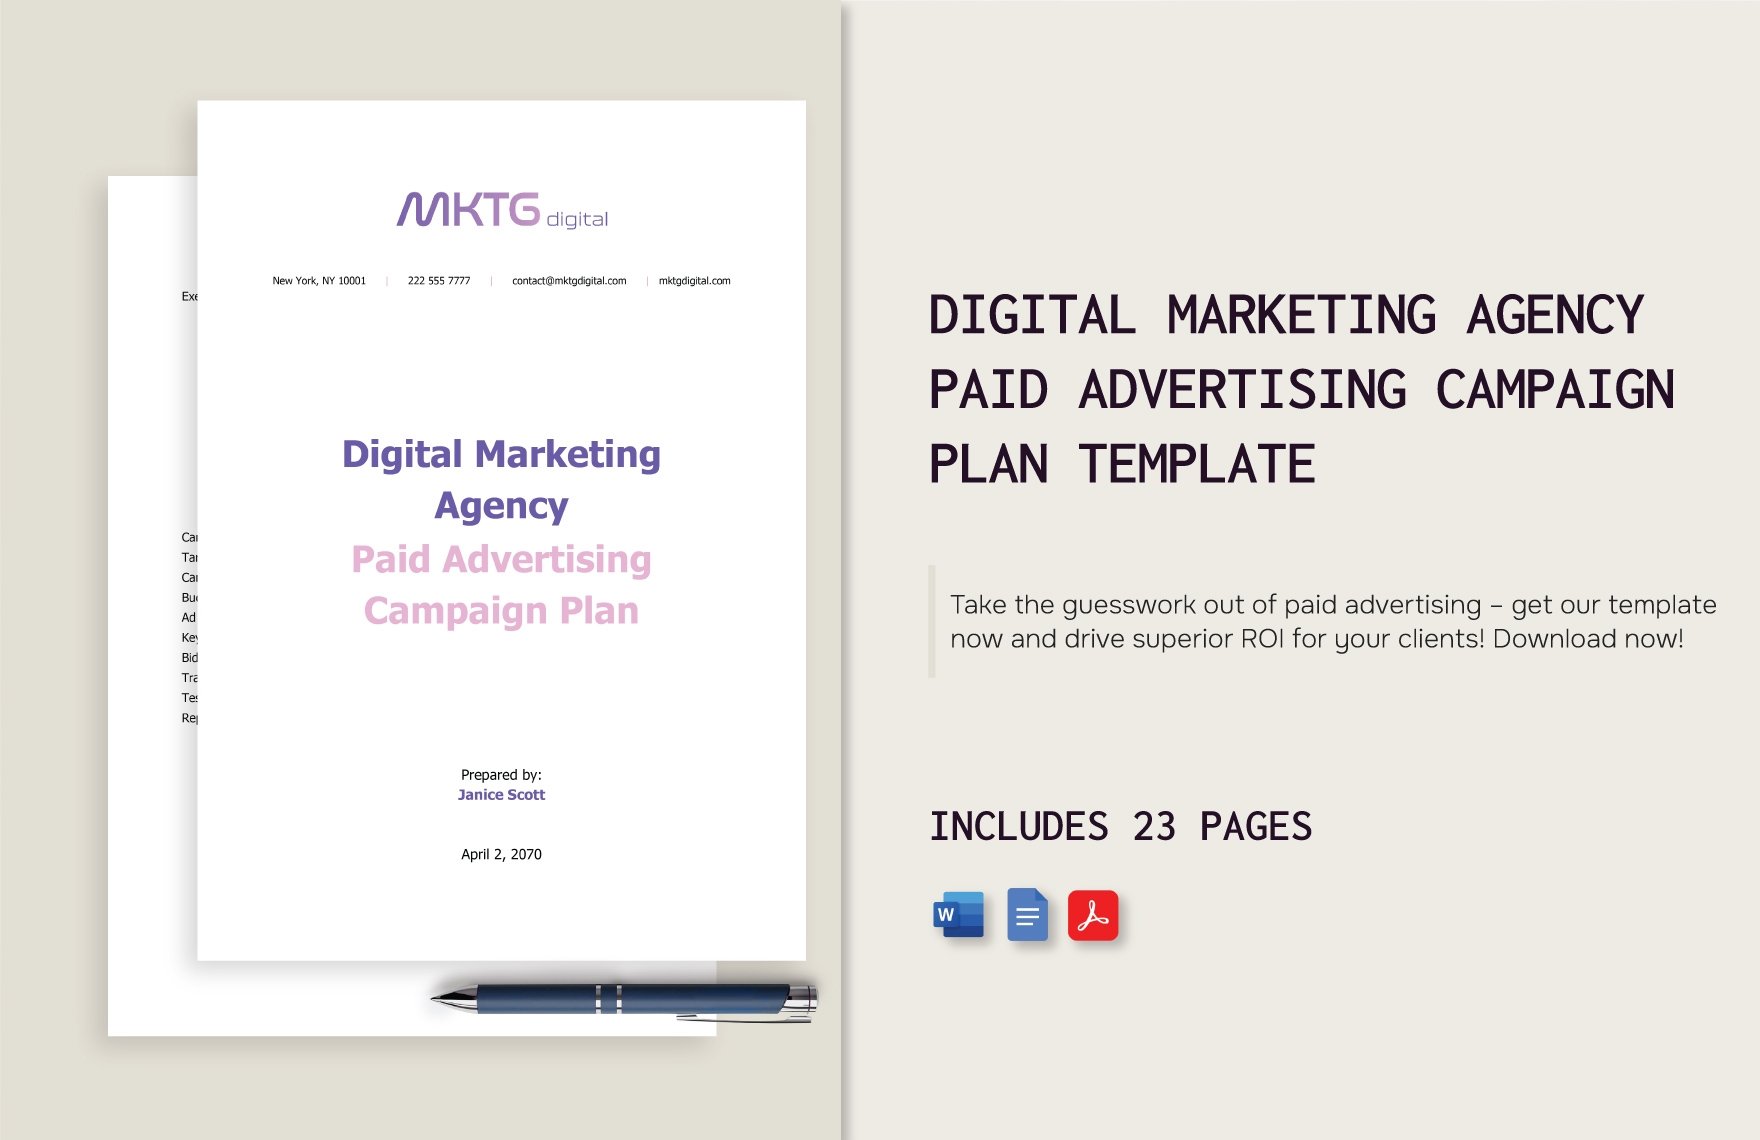 Digital Marketing Agency Paid Advertising Campaign Plan Template